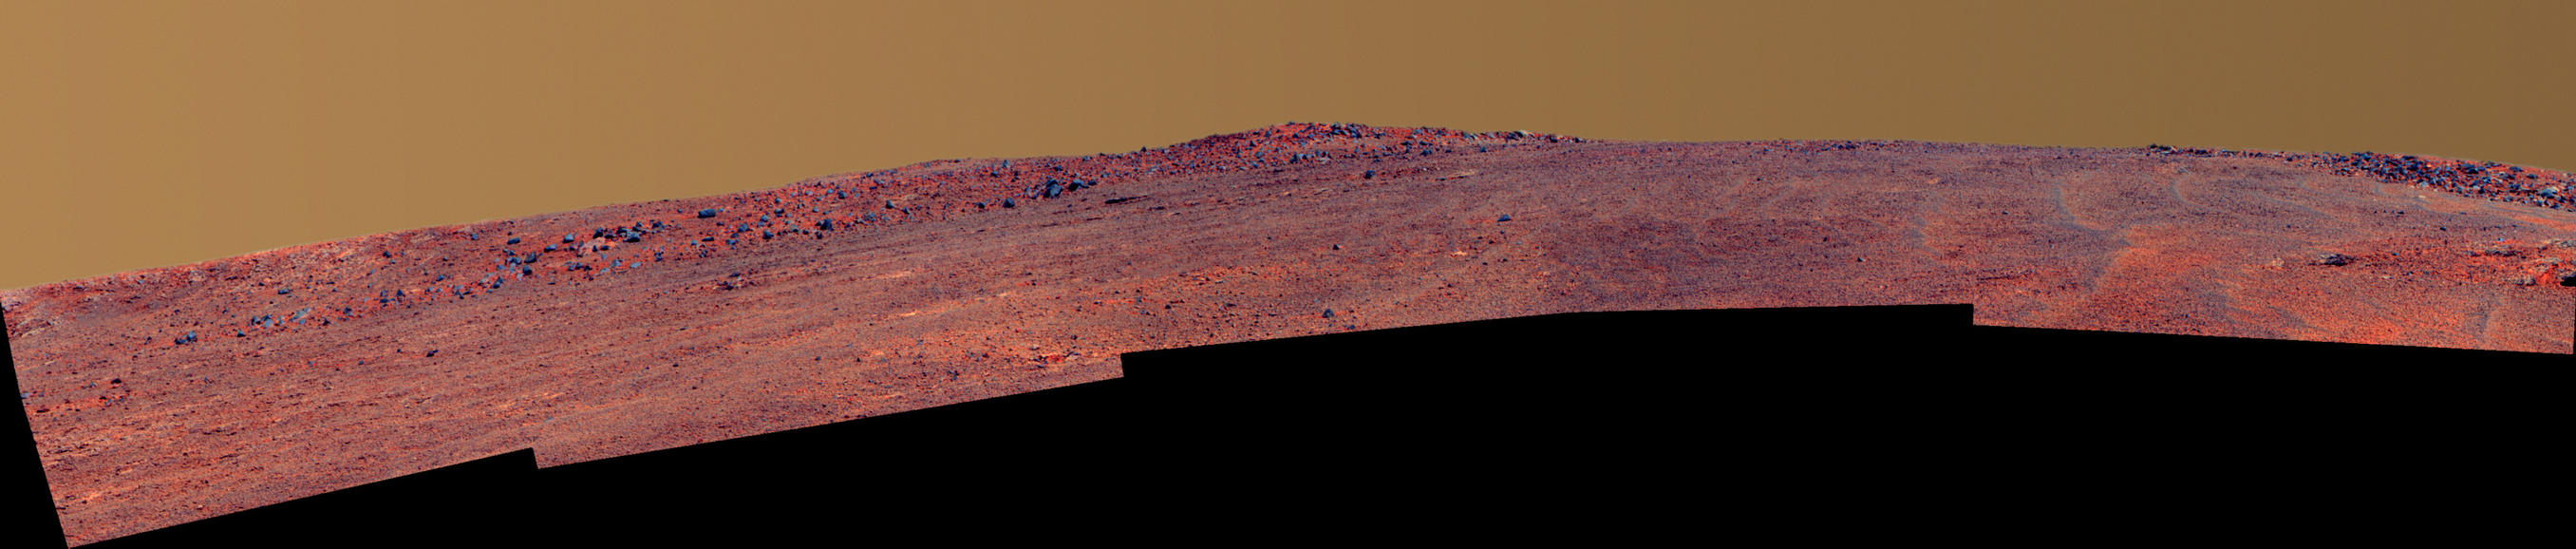 The boulder-studded ridge in this scene recorded by NASA's Mars Exploration Rover Opportunity is "McClure-Beverlin Escarpment," informally named for Jack Beverlin and Bill McClure, engineers who on Feb. 14, 1969, risked their lives to save NASA's second successful Mars mission, Mariner 6, on its launch pad.